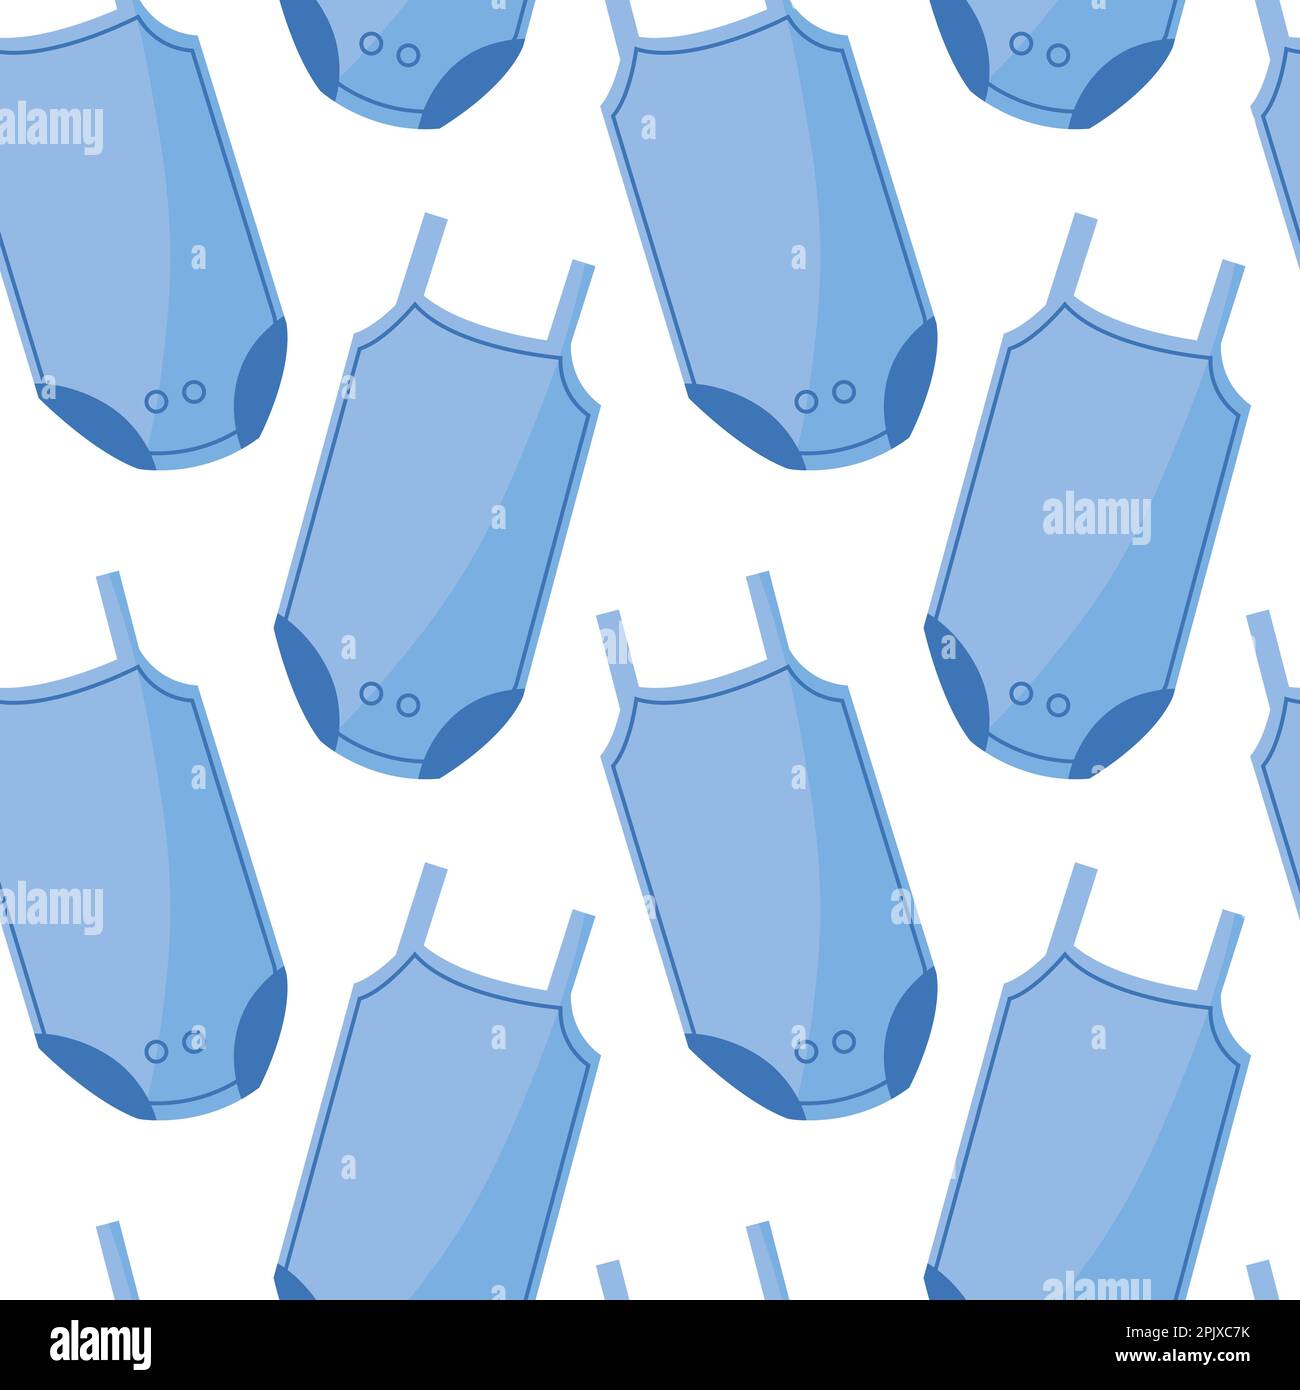 Baby bodysuits seamless pattern blue color. Newborn and toddler clothing pattern. Stock Vector